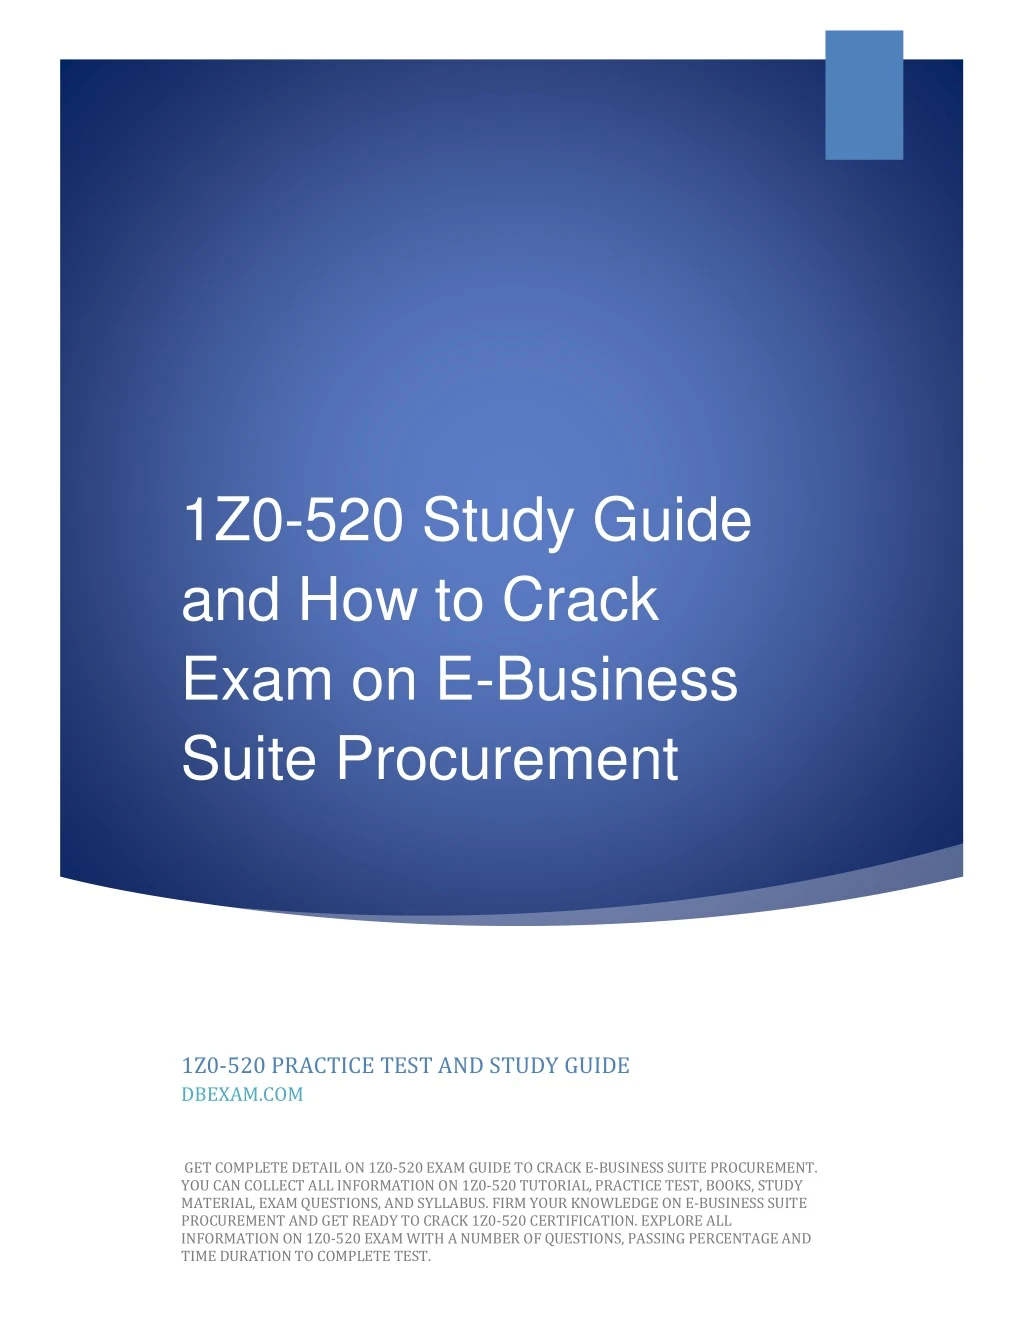 1z0 520 study guide and how to crack exam